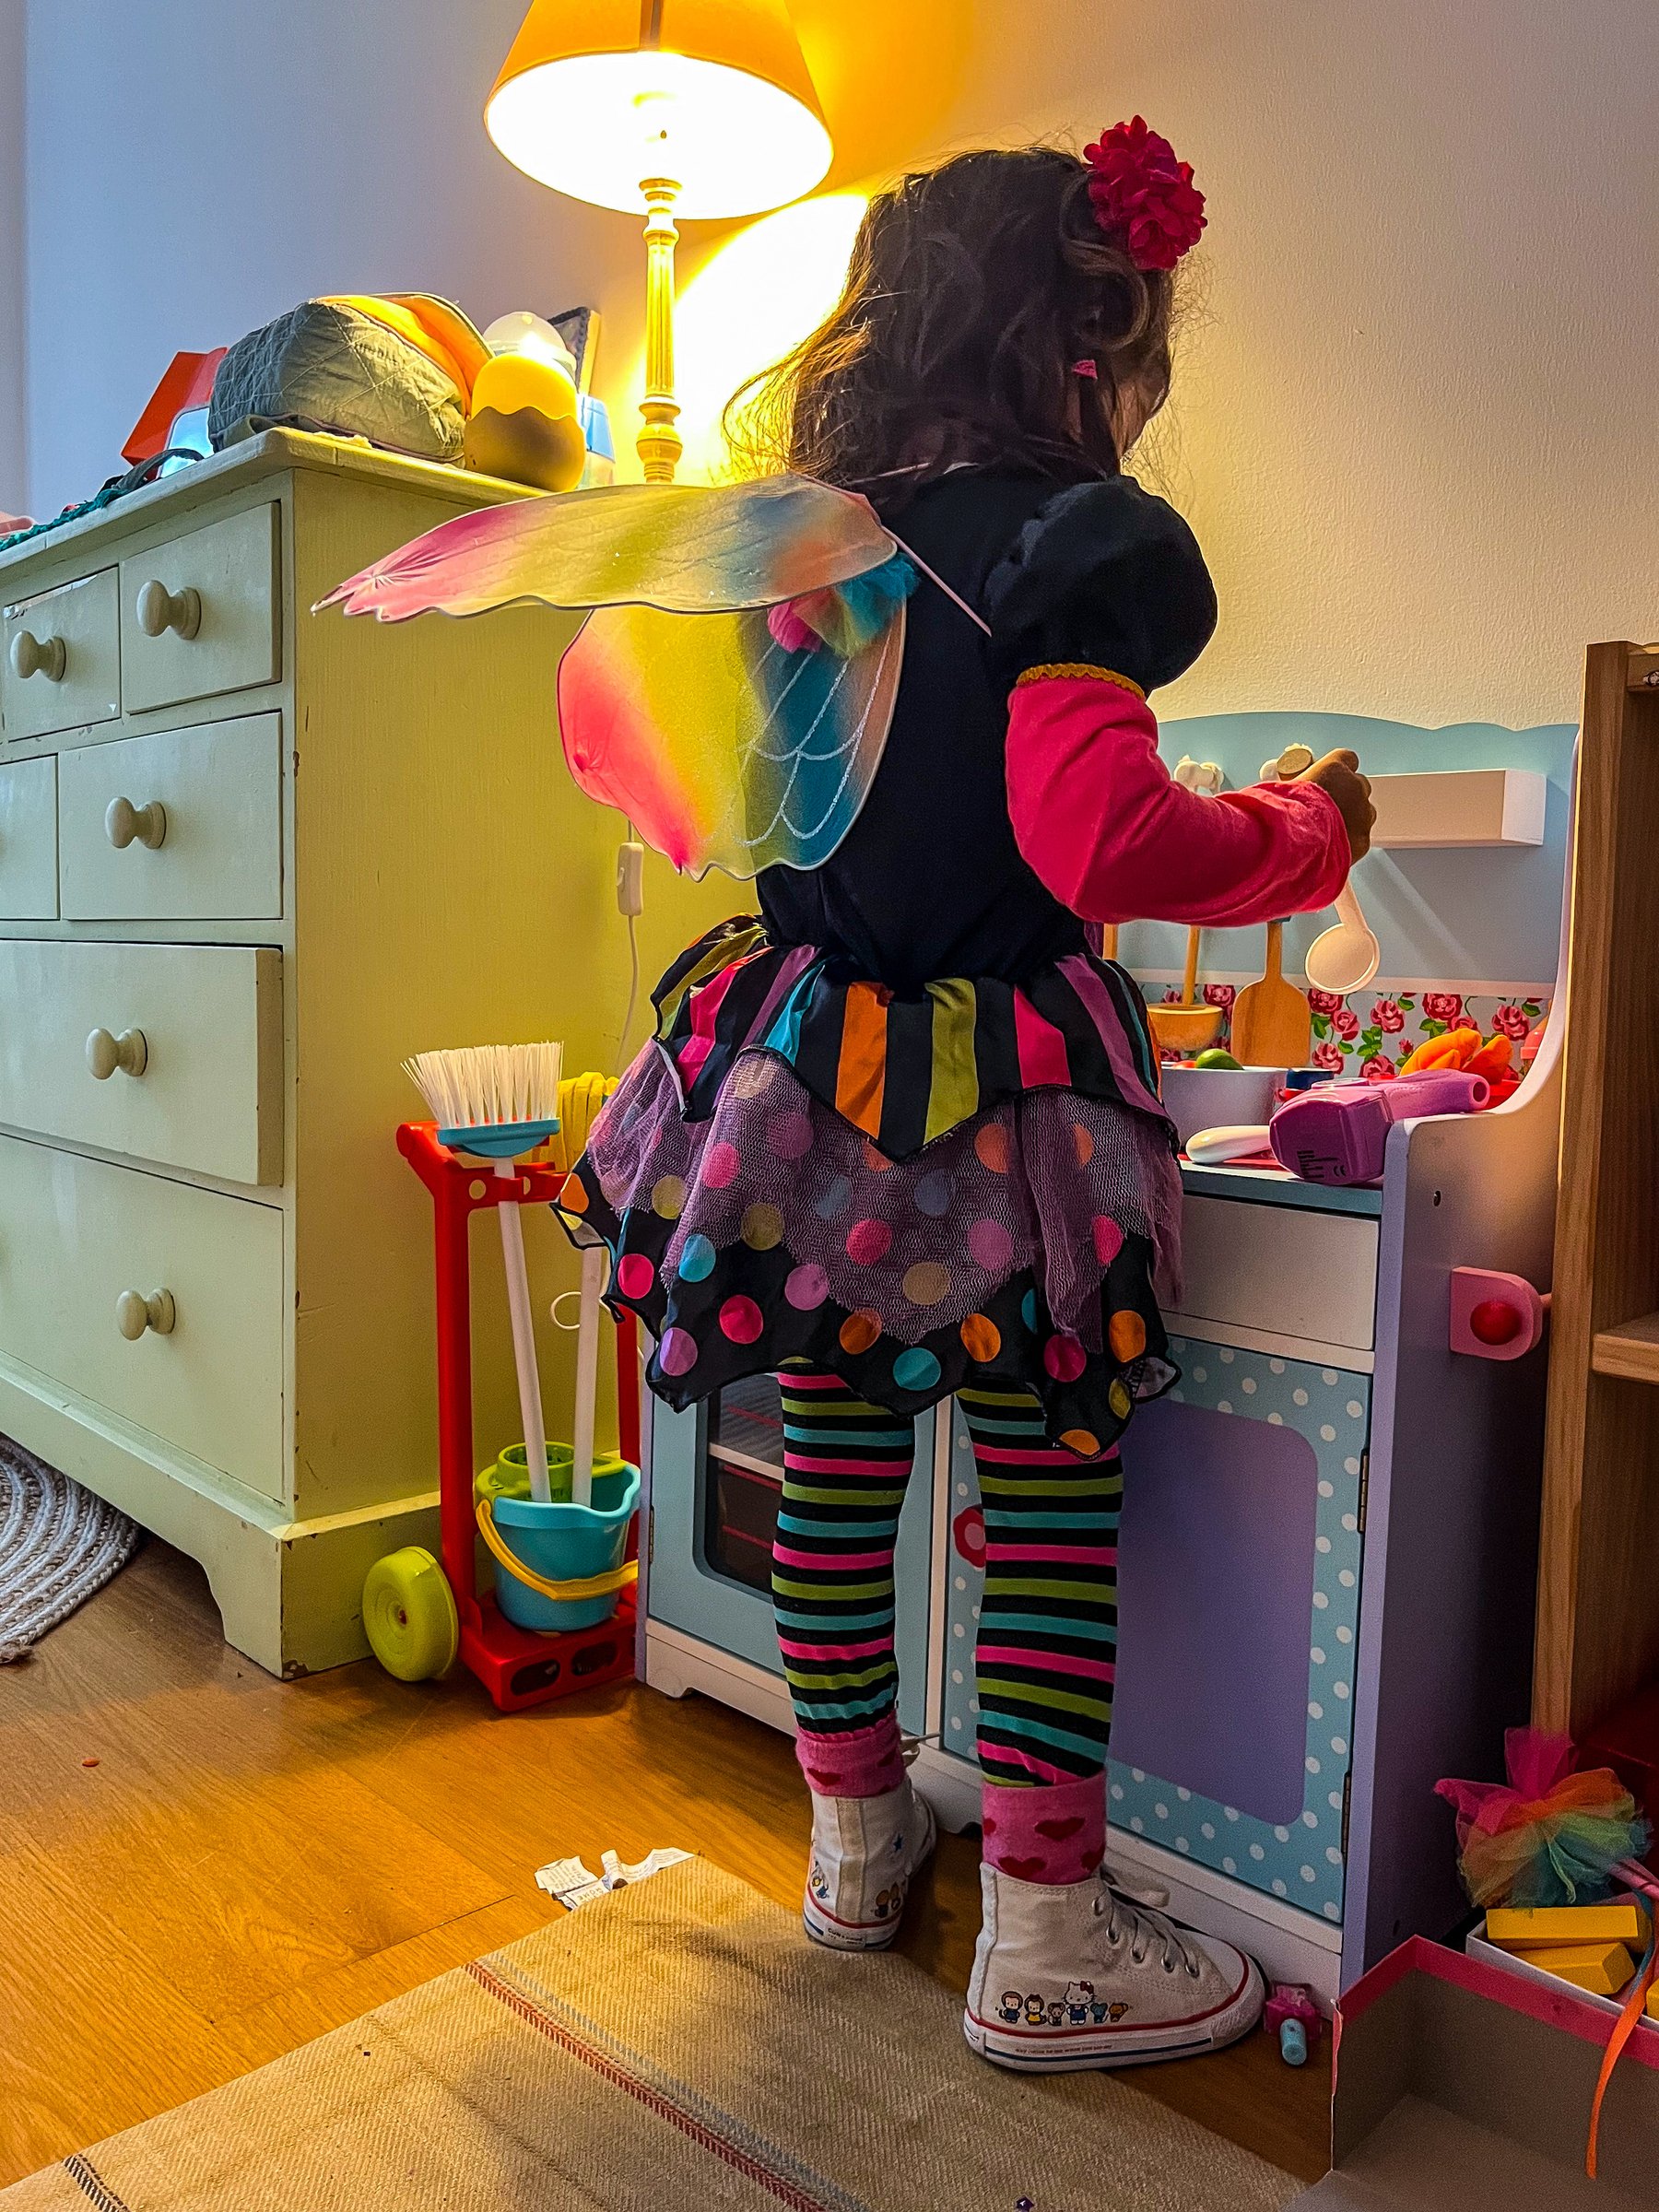 A colorful dressed girl.